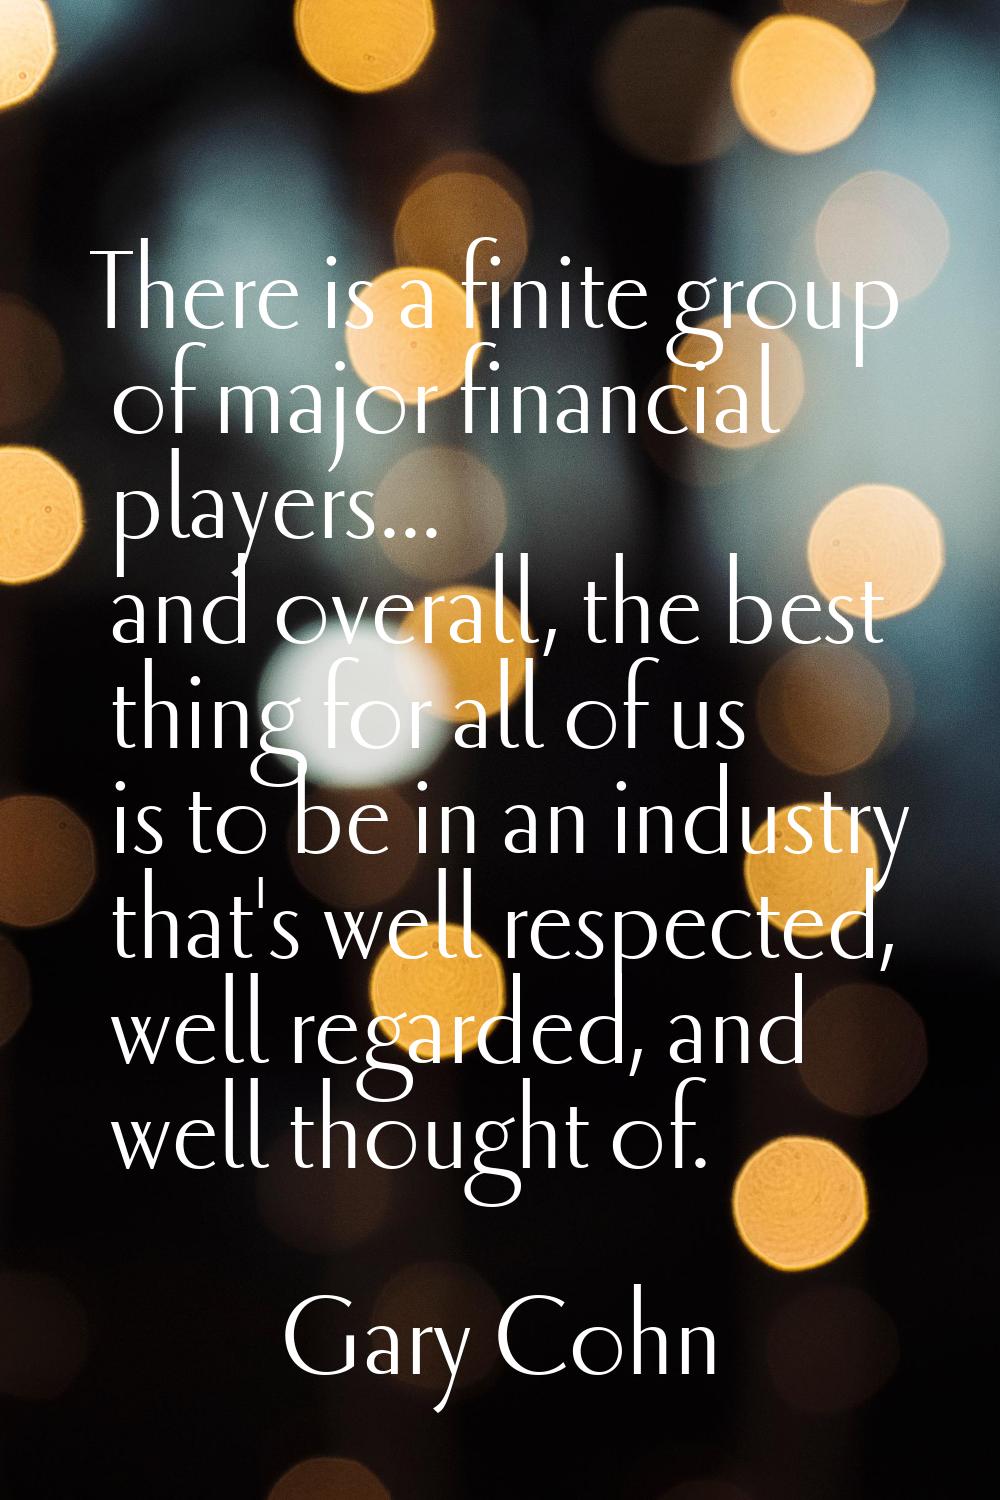 There is a finite group of major financial players... and overall, the best thing for all of us is 